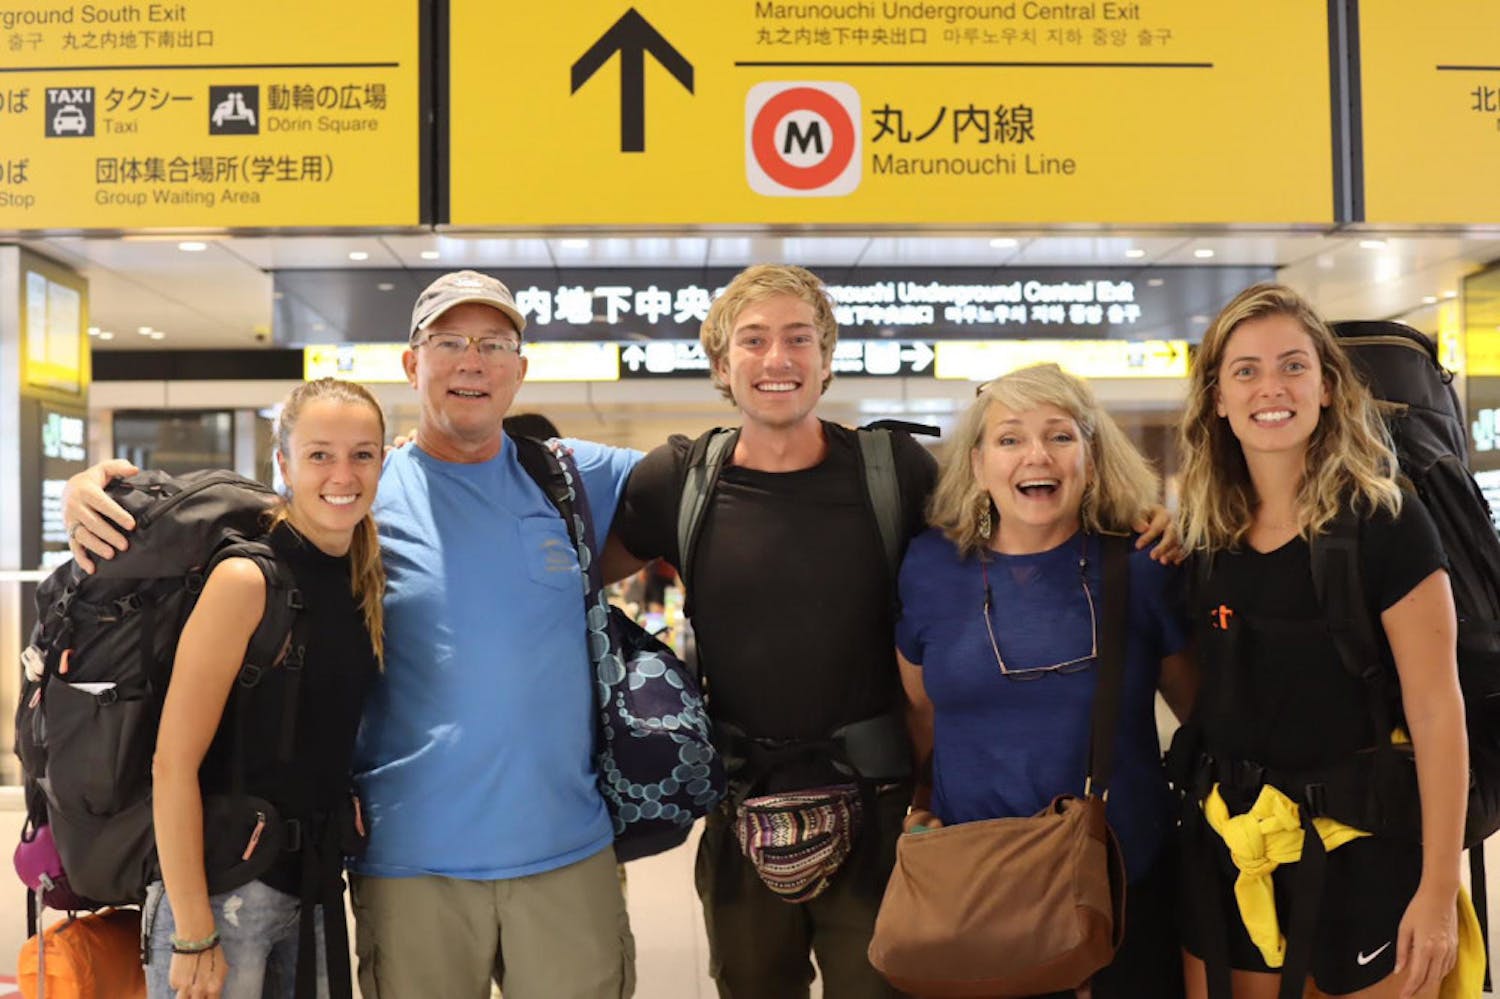 Briggs (center) and the rest of Team East, Paula (left) and Renata (right), are met by his parents at a train station in Japan for the trip’s finale.